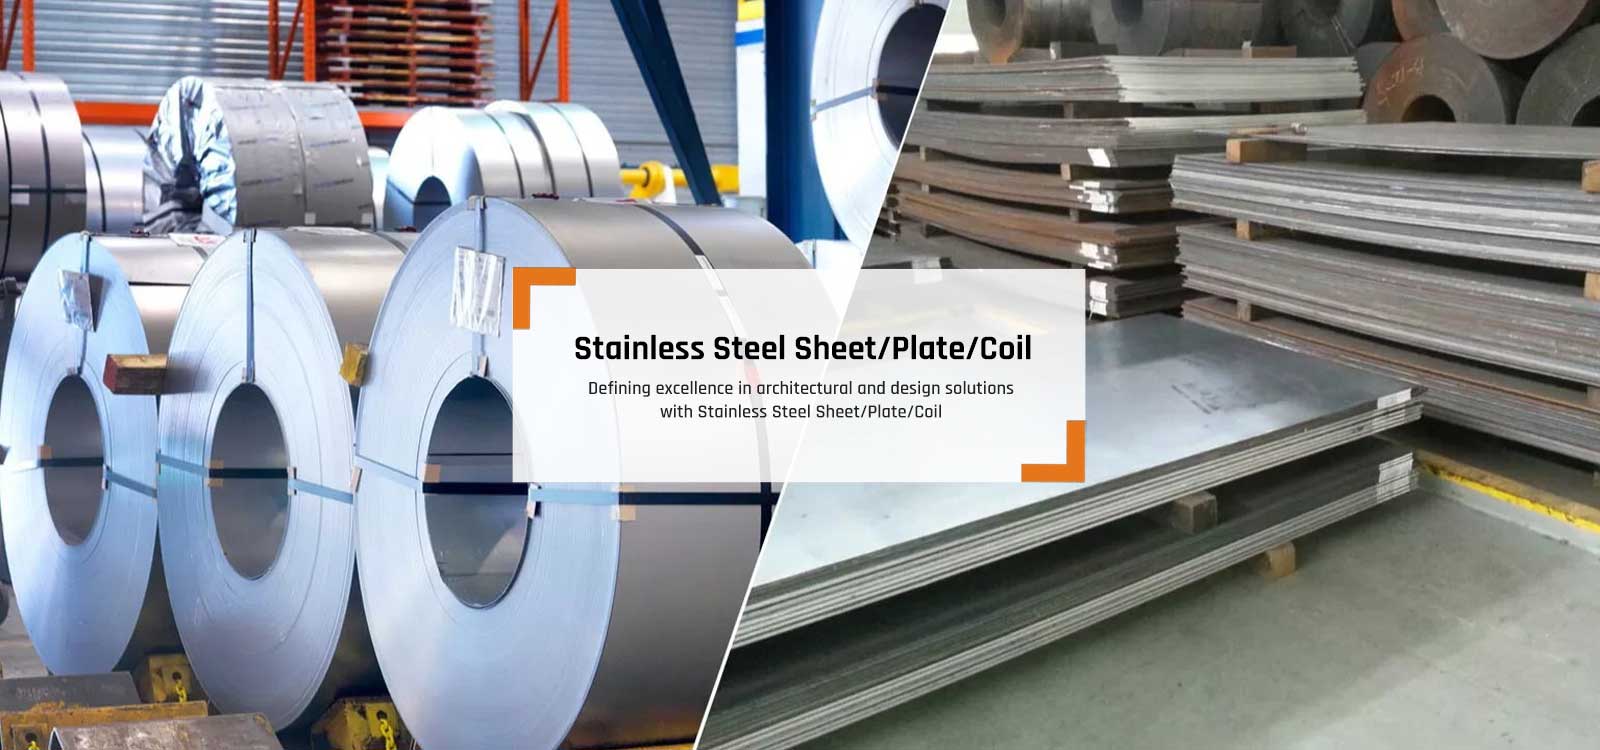 Stainless Steel Sheet Plates Coils Manufacturers in Mumbai